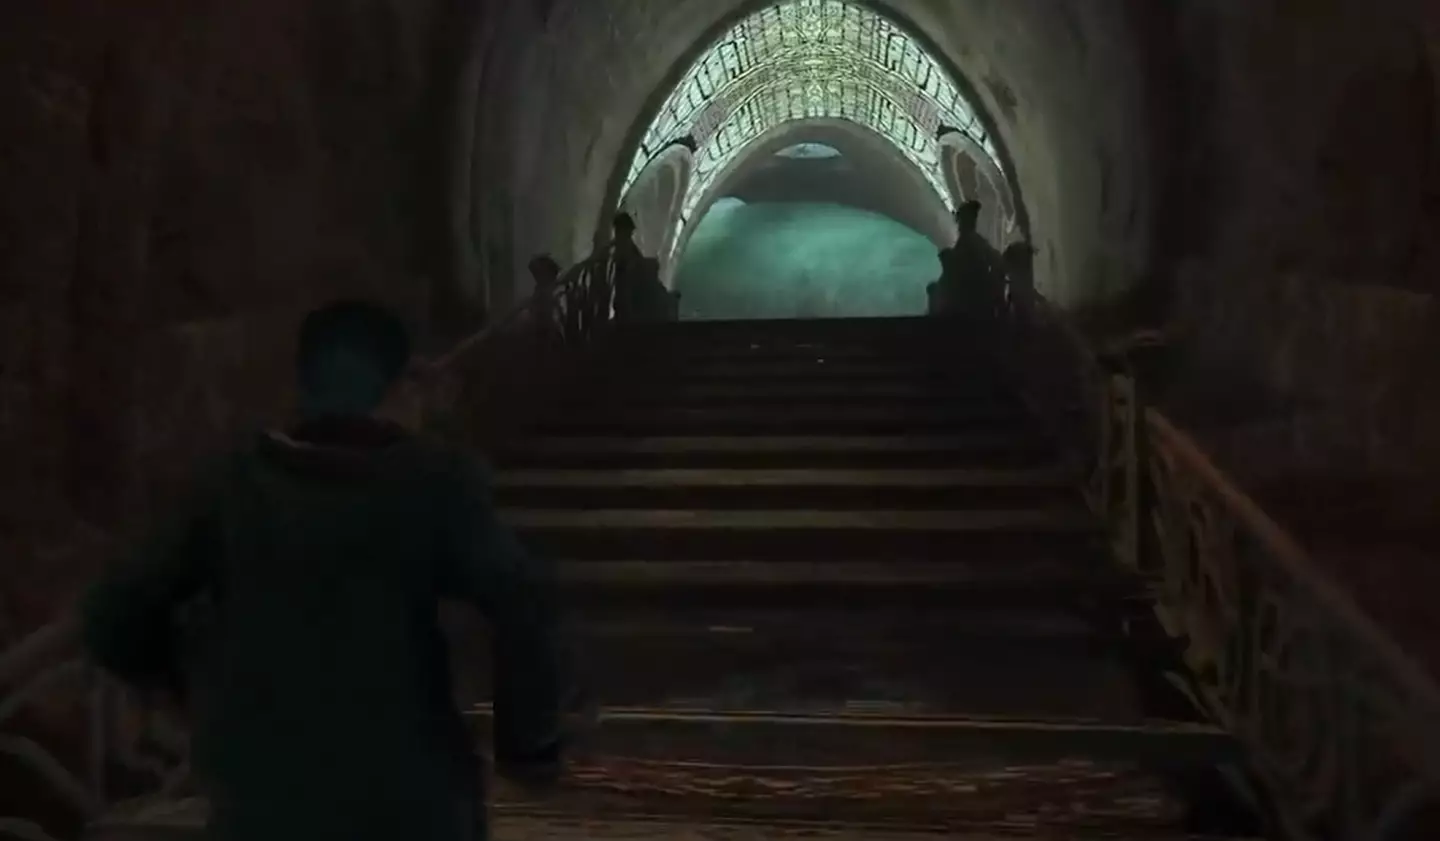 A Hogwarts Legacy player saw a giant tentacle sliding through a hallway and thought it was a basilisk.